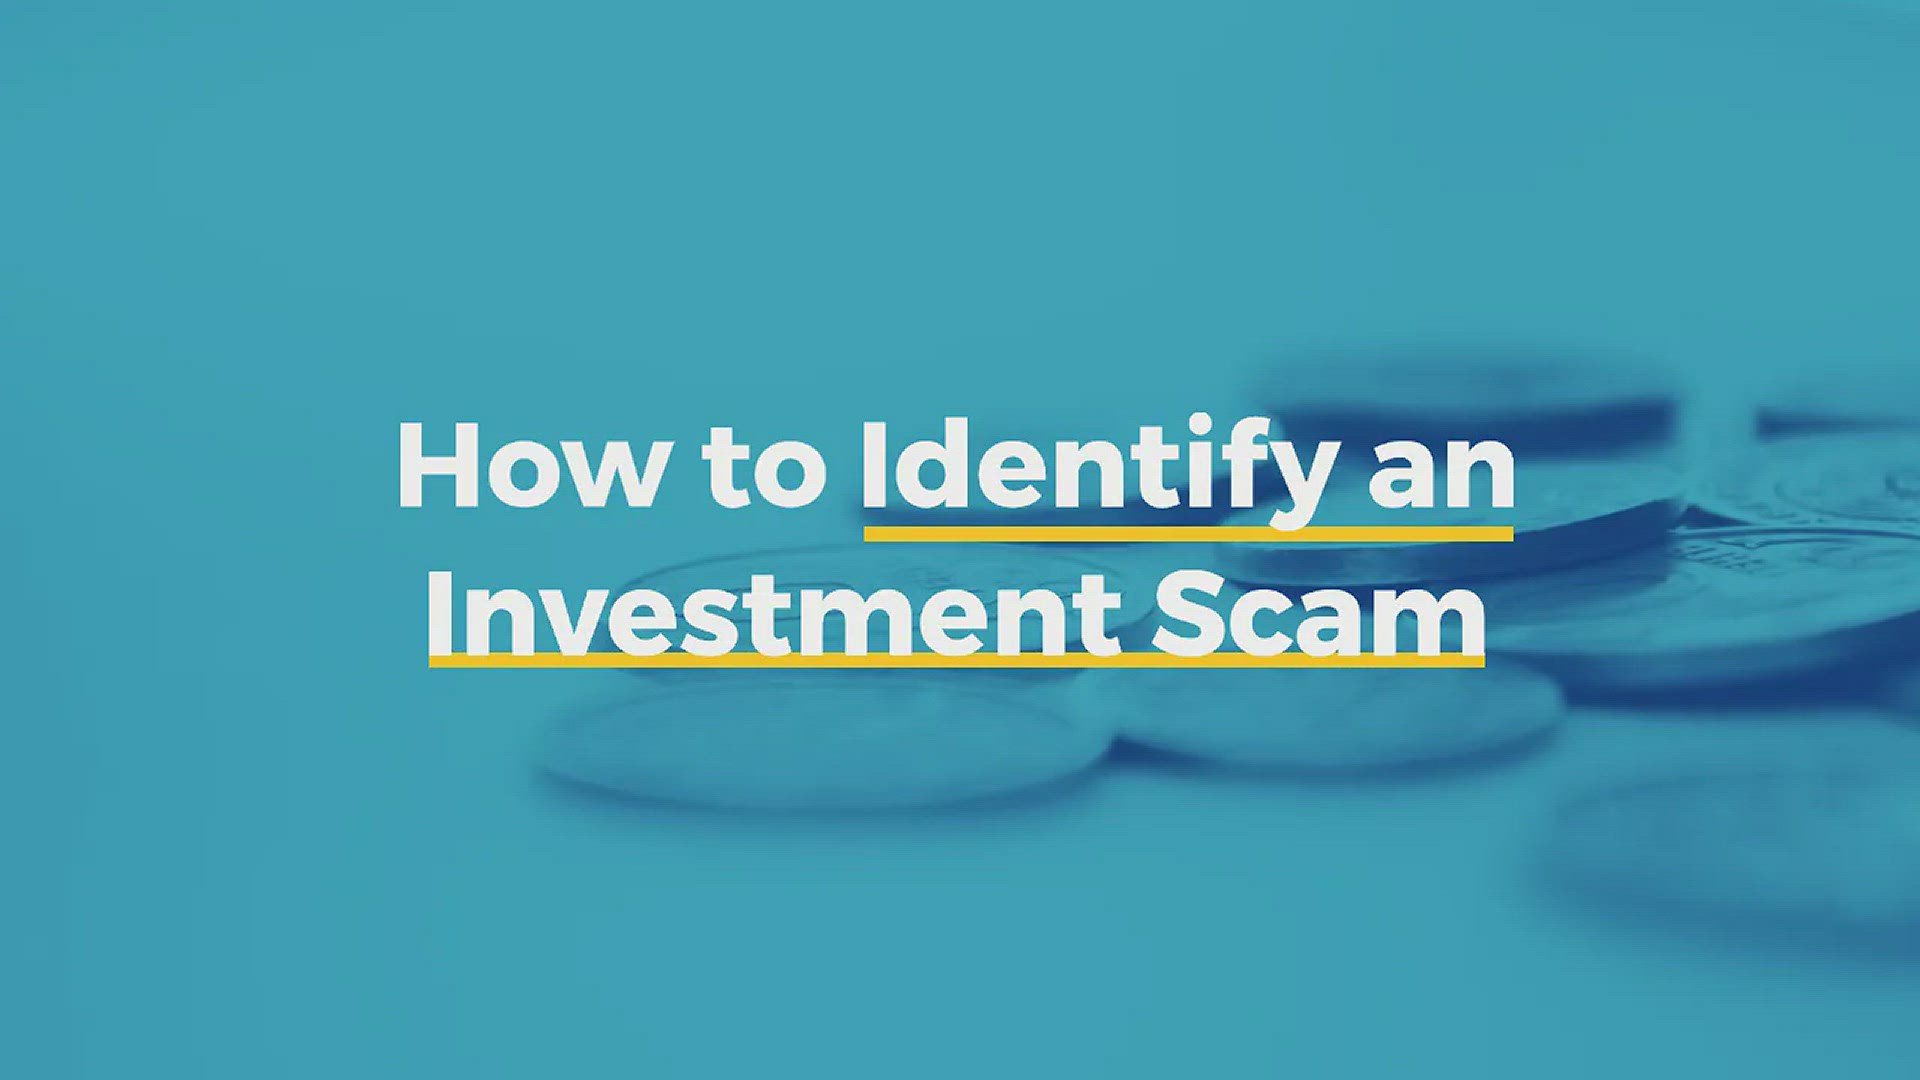 'Video thumbnail for How to Identify an Investment Scam'